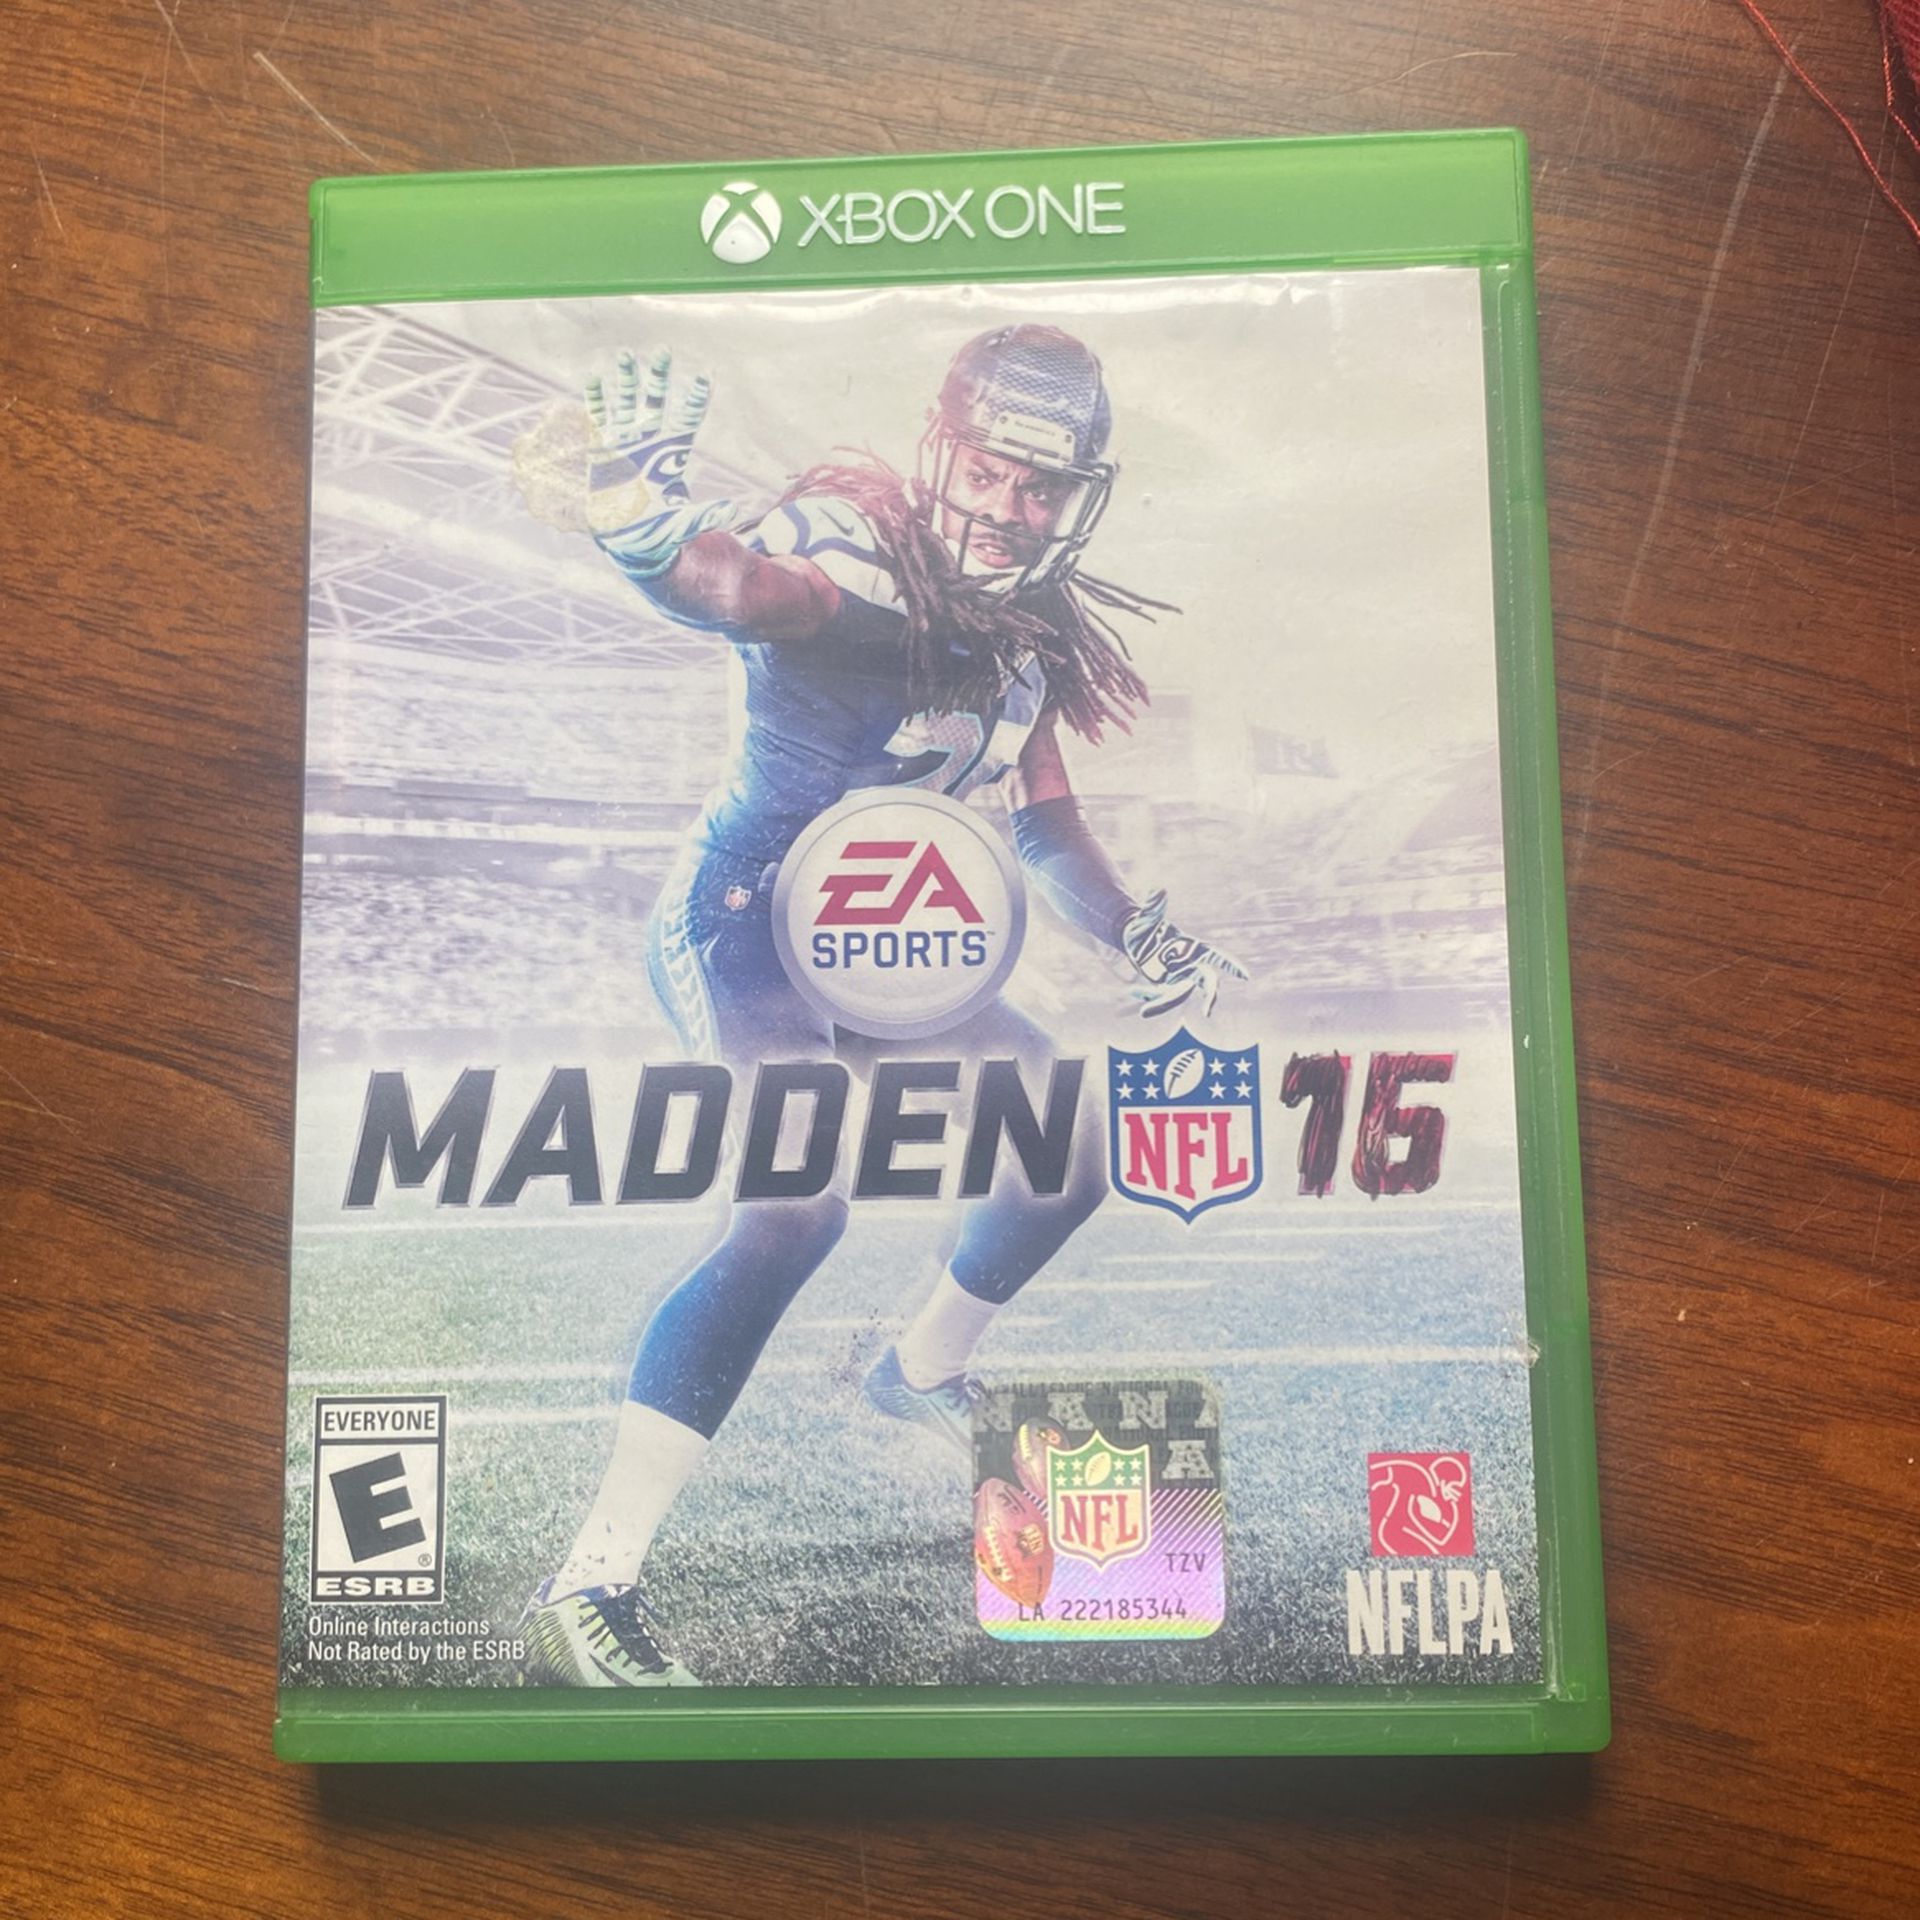 Madden NFL 15 - Xbox One for Sale in Great Neck, NY - OfferUp